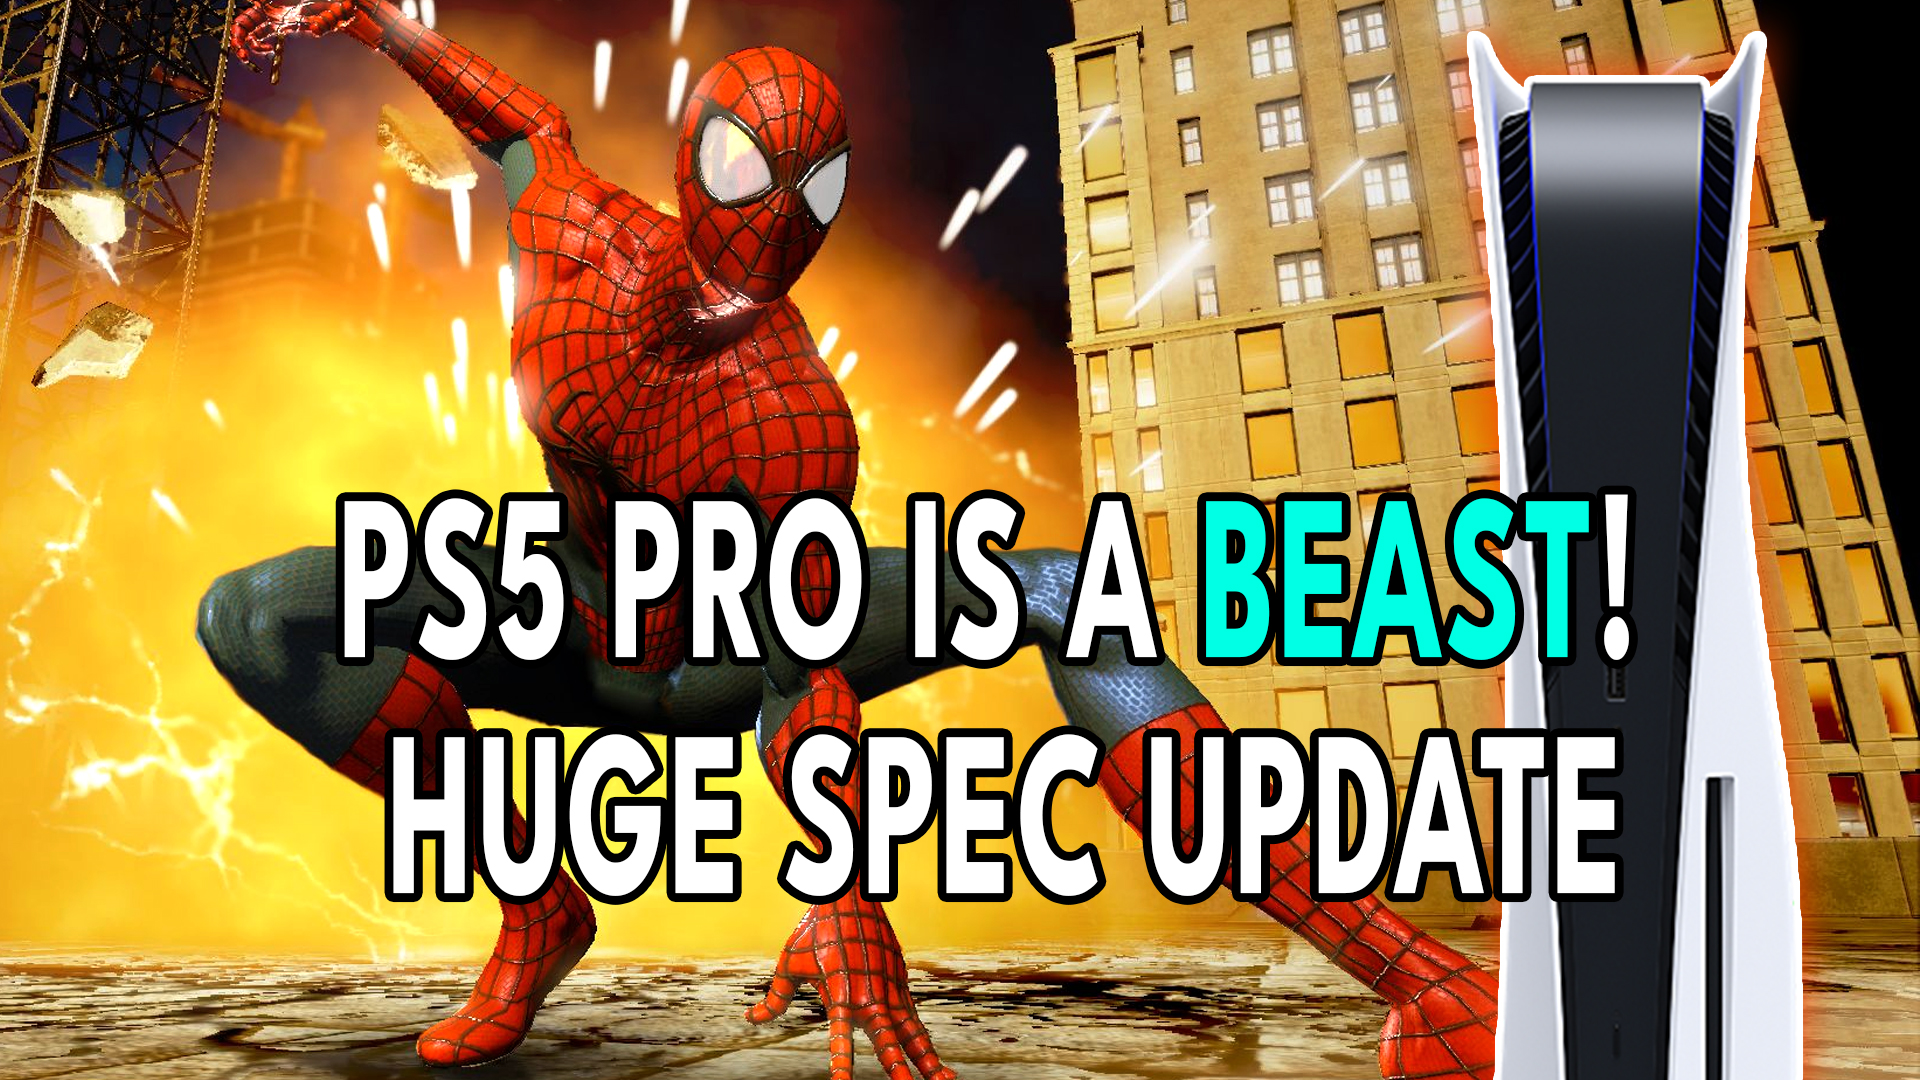 RedGamingTech on X: #Sony #PS5 Pro Is A MONSTER - Performance, Release Date  & Specs ANALYSIS #PS5Pro #Playstation5 #Playstation5Pro #consolegaming    / X